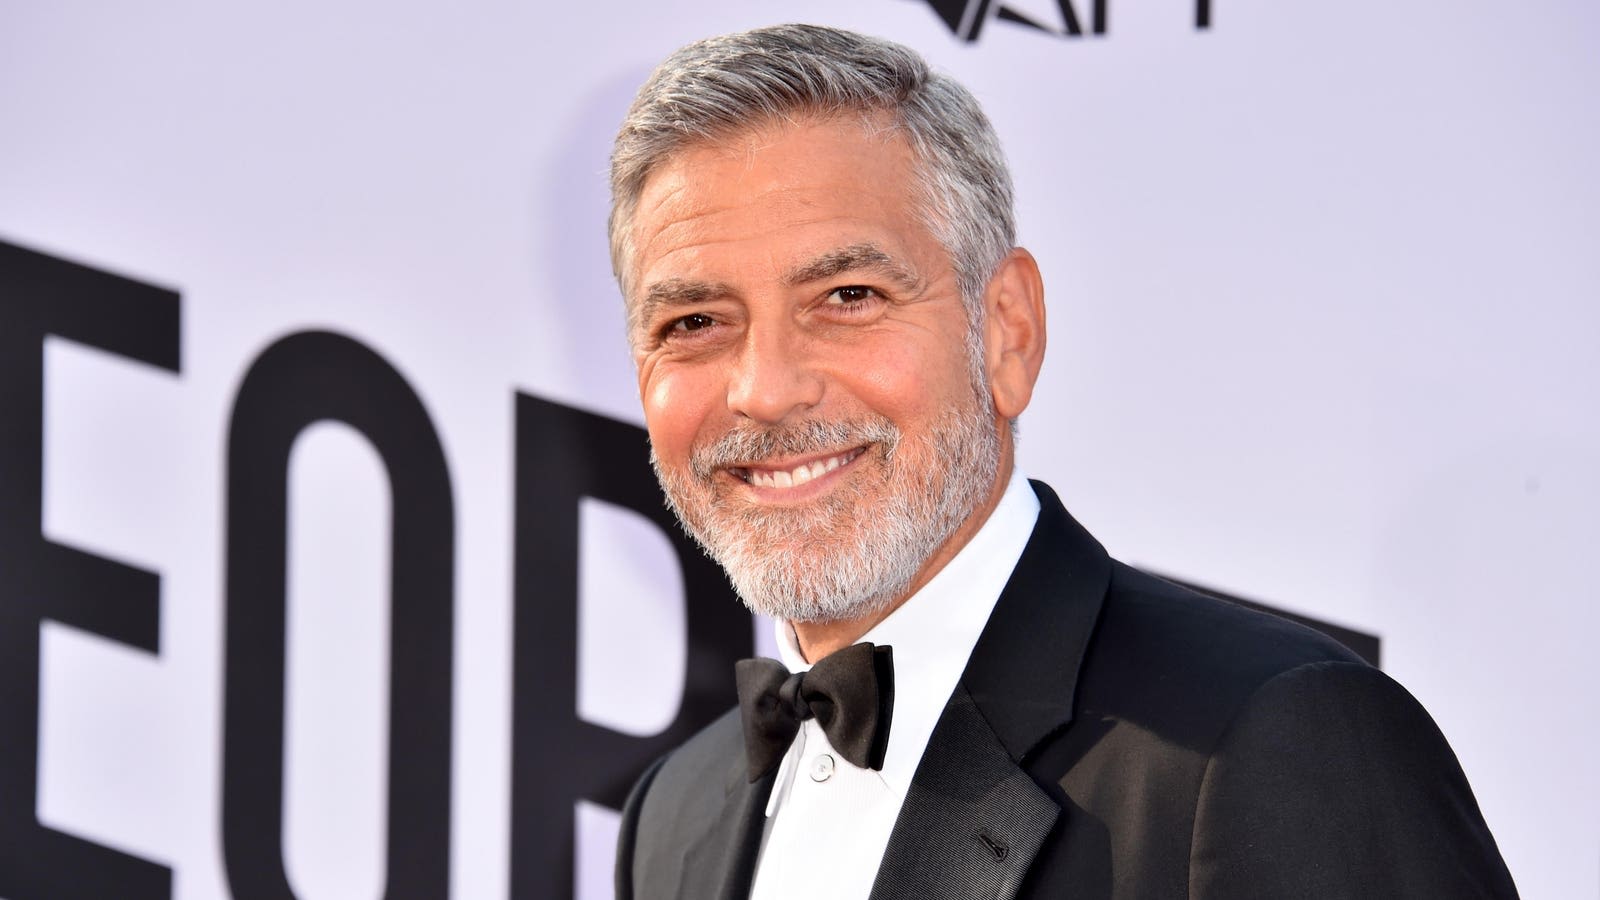 George Clooney Says Biden Should Drop Out To Save Democracy — Joining These Other A-Listers Who Have Stopped...